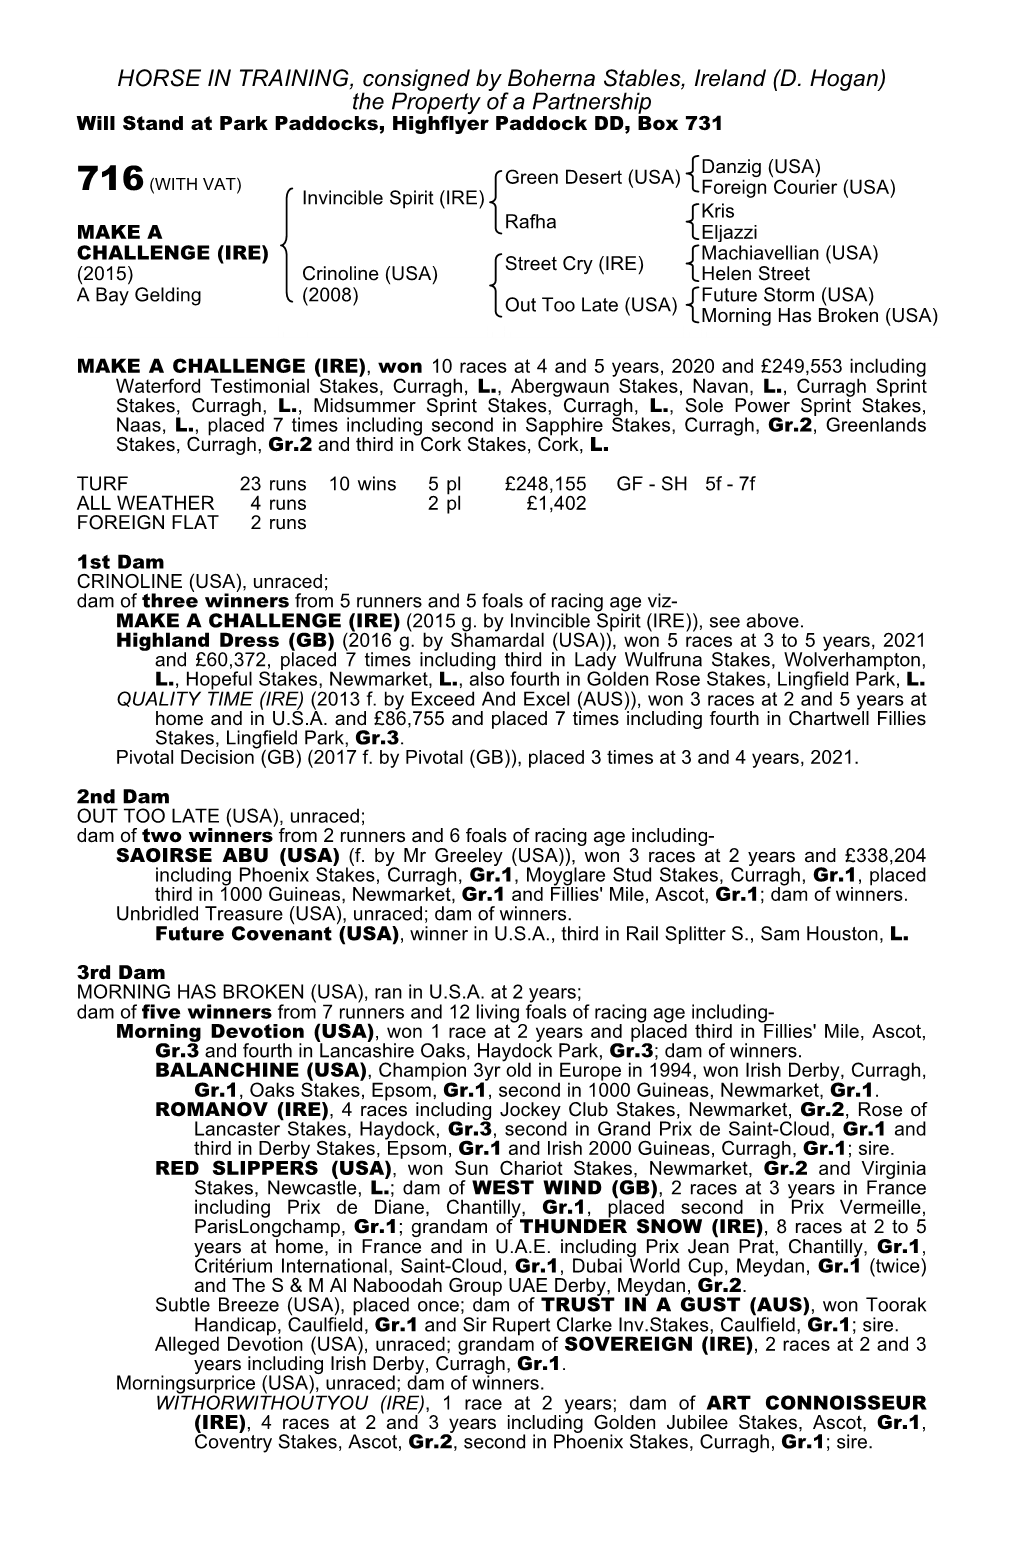 HORSE in TRAINING, Consigned by Boherna Stables, Ireland (D